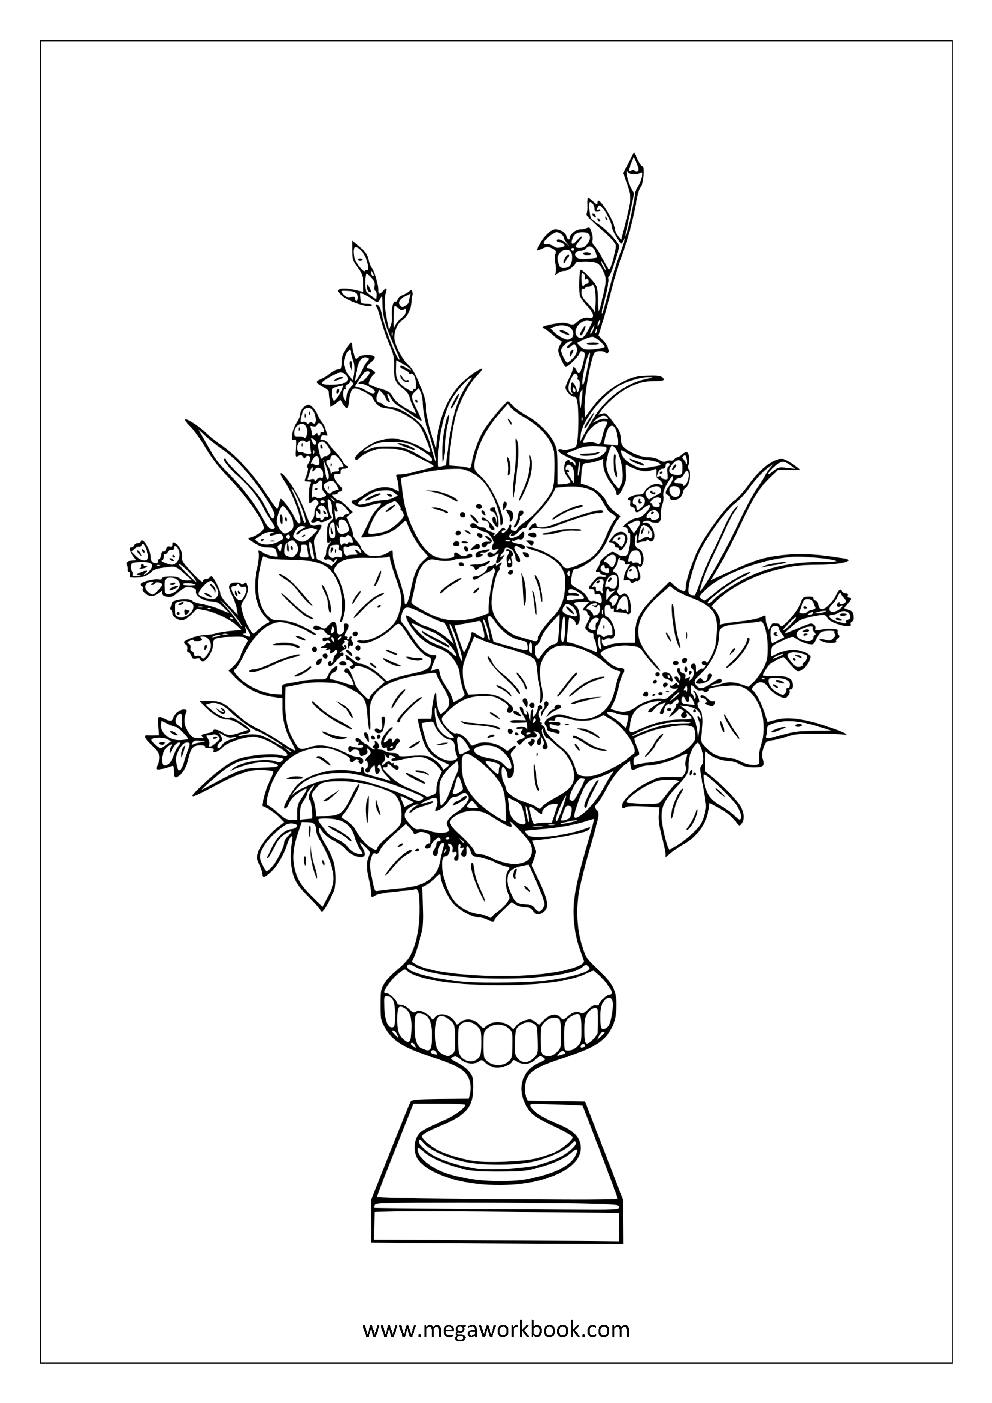 flower coloring pages plant tree coloring pages leaf coloring pages free printables coloring sheets megaworkbook